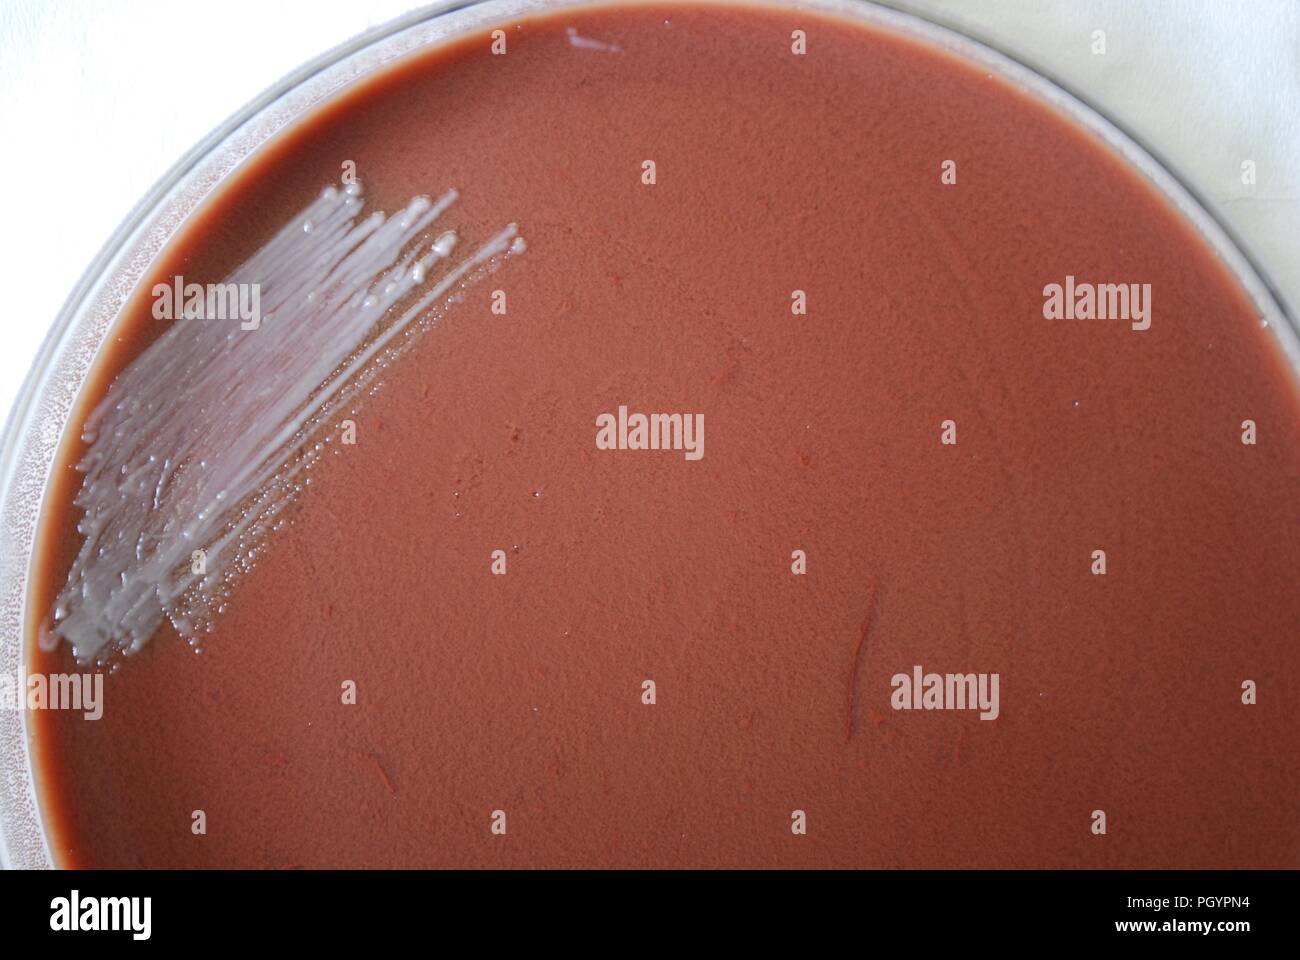 Colonial morphology of Gram-negative Francisella tularensis bacteria grown 24 hours on a medium of cysteine heart infusion agar (CHAB), 2010. Image courtesy Centers for Disease Control (CDC) / Dr Todd Parker, Audra Marsh. () Stock Photo